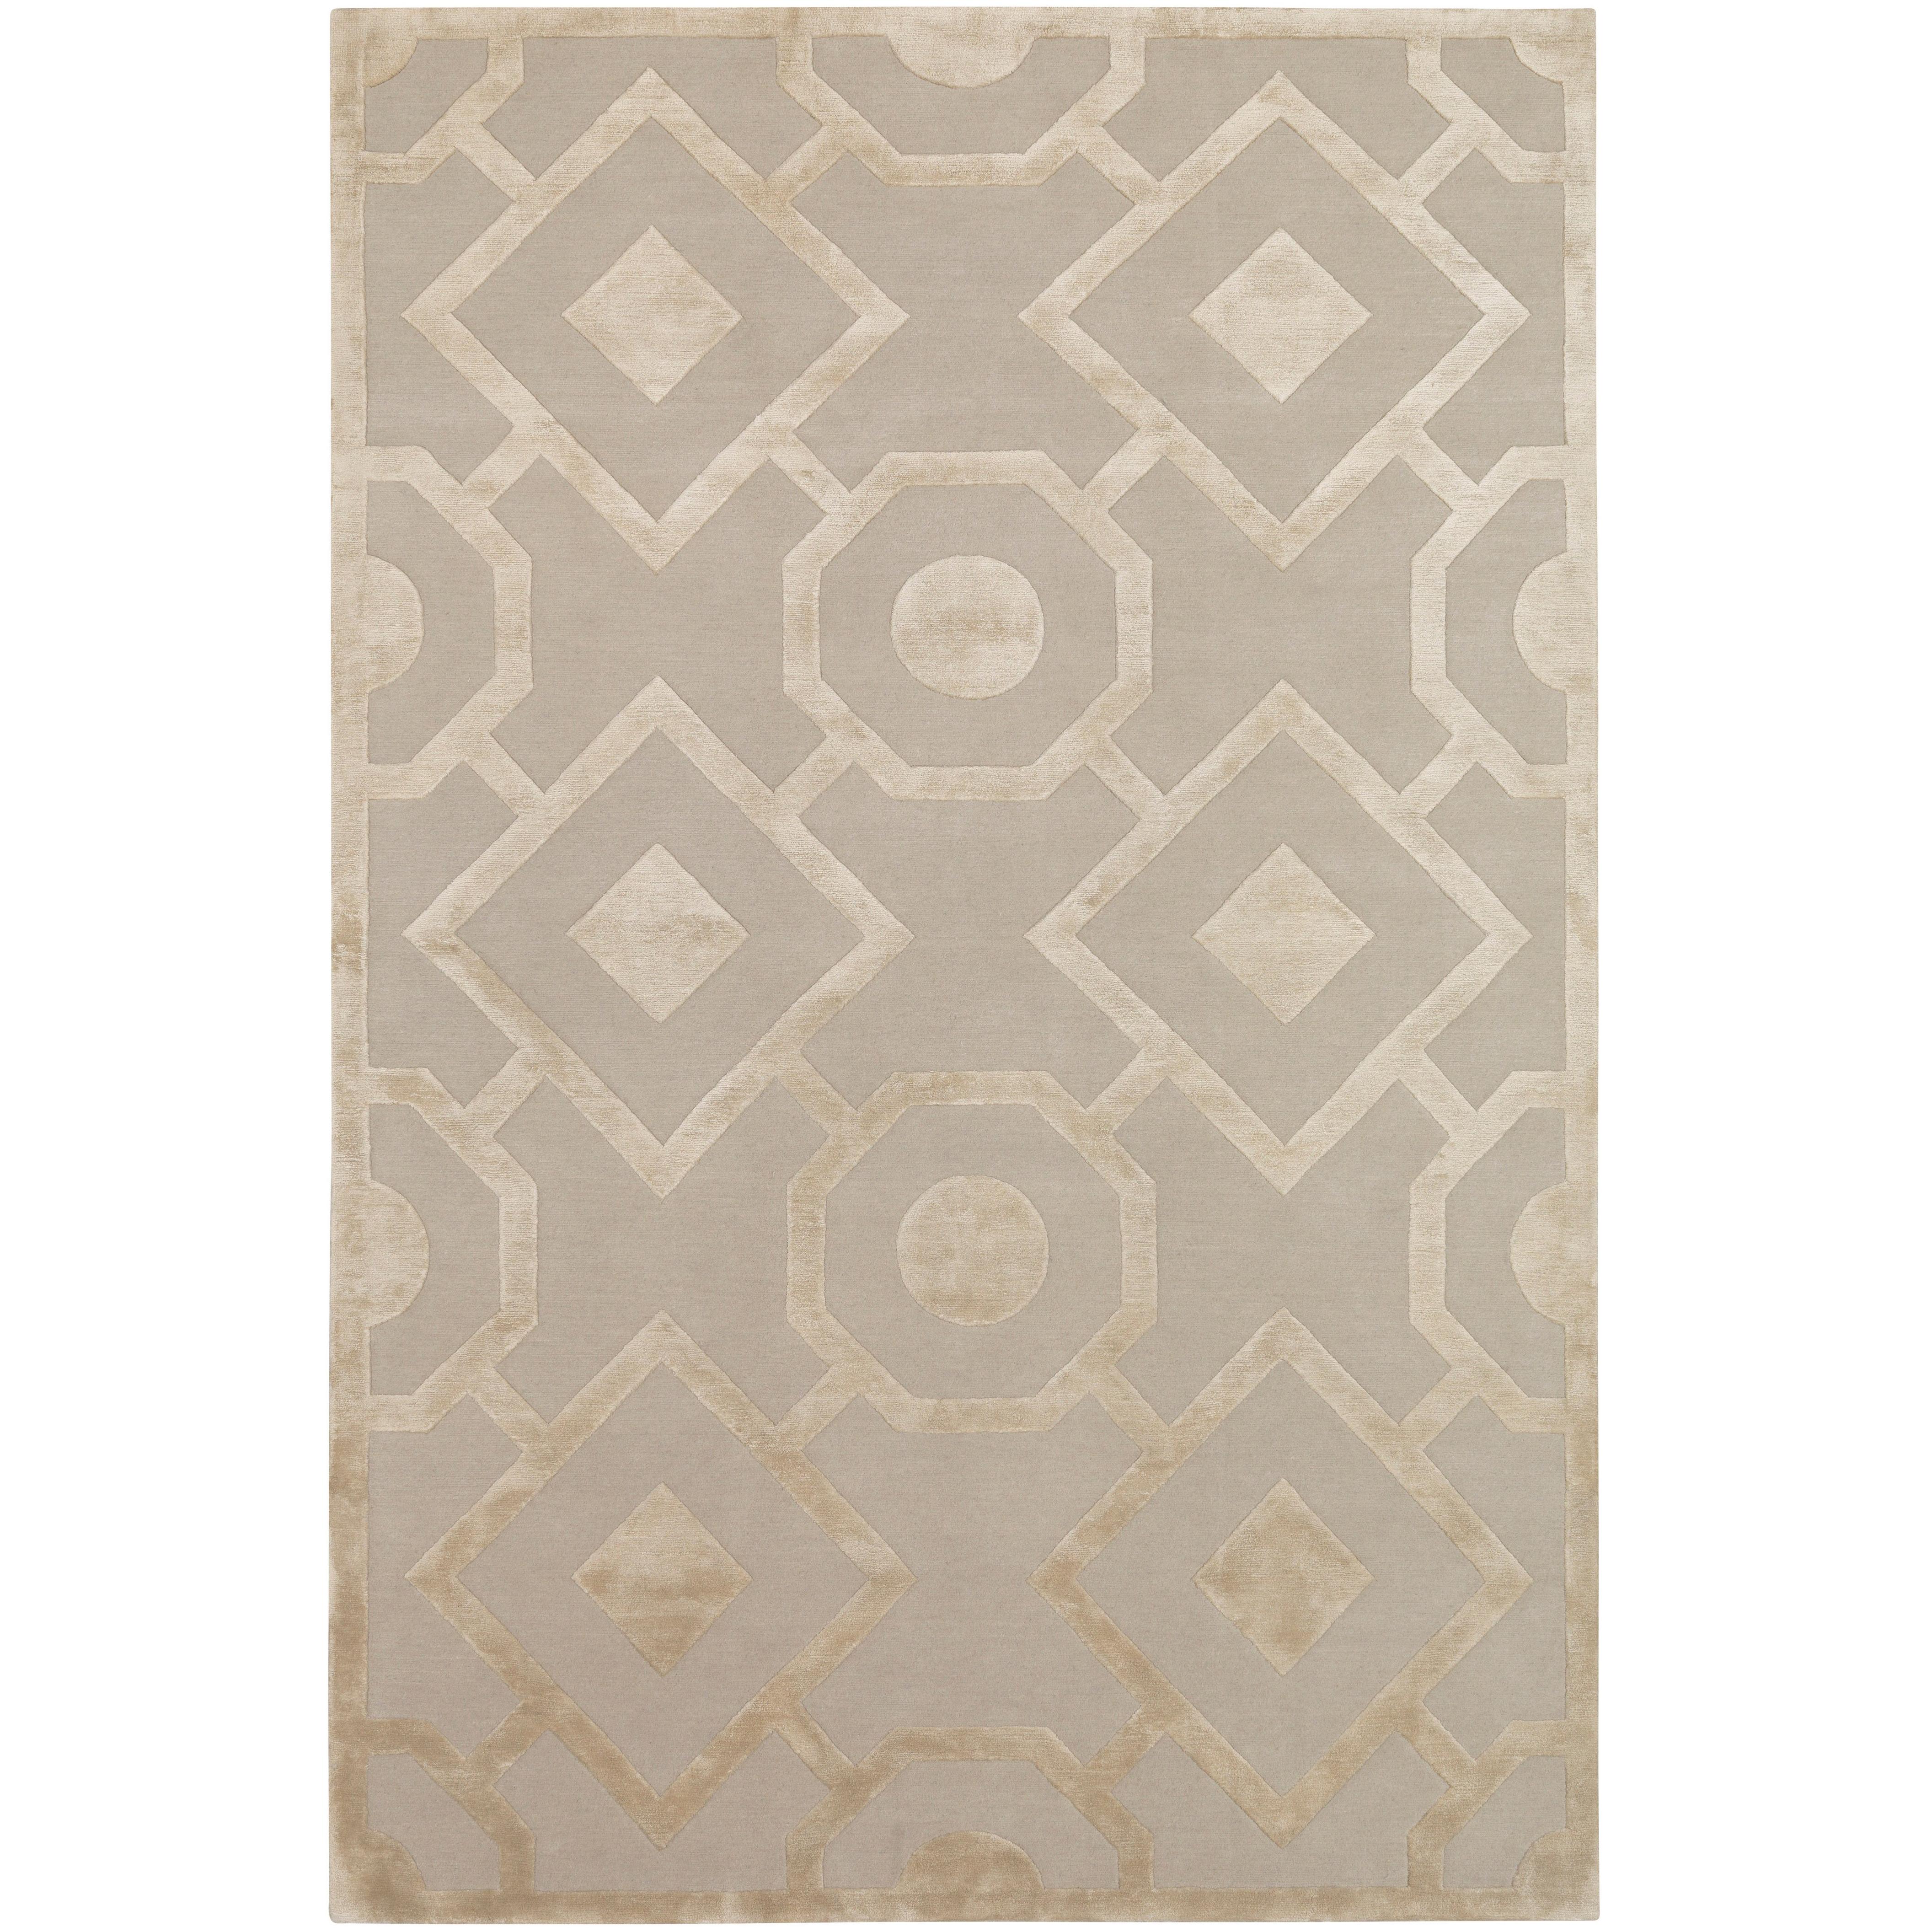 Romy Hand-Knotted 10x8 Floor Rug in Wool and Silk by Suzanne Sharp